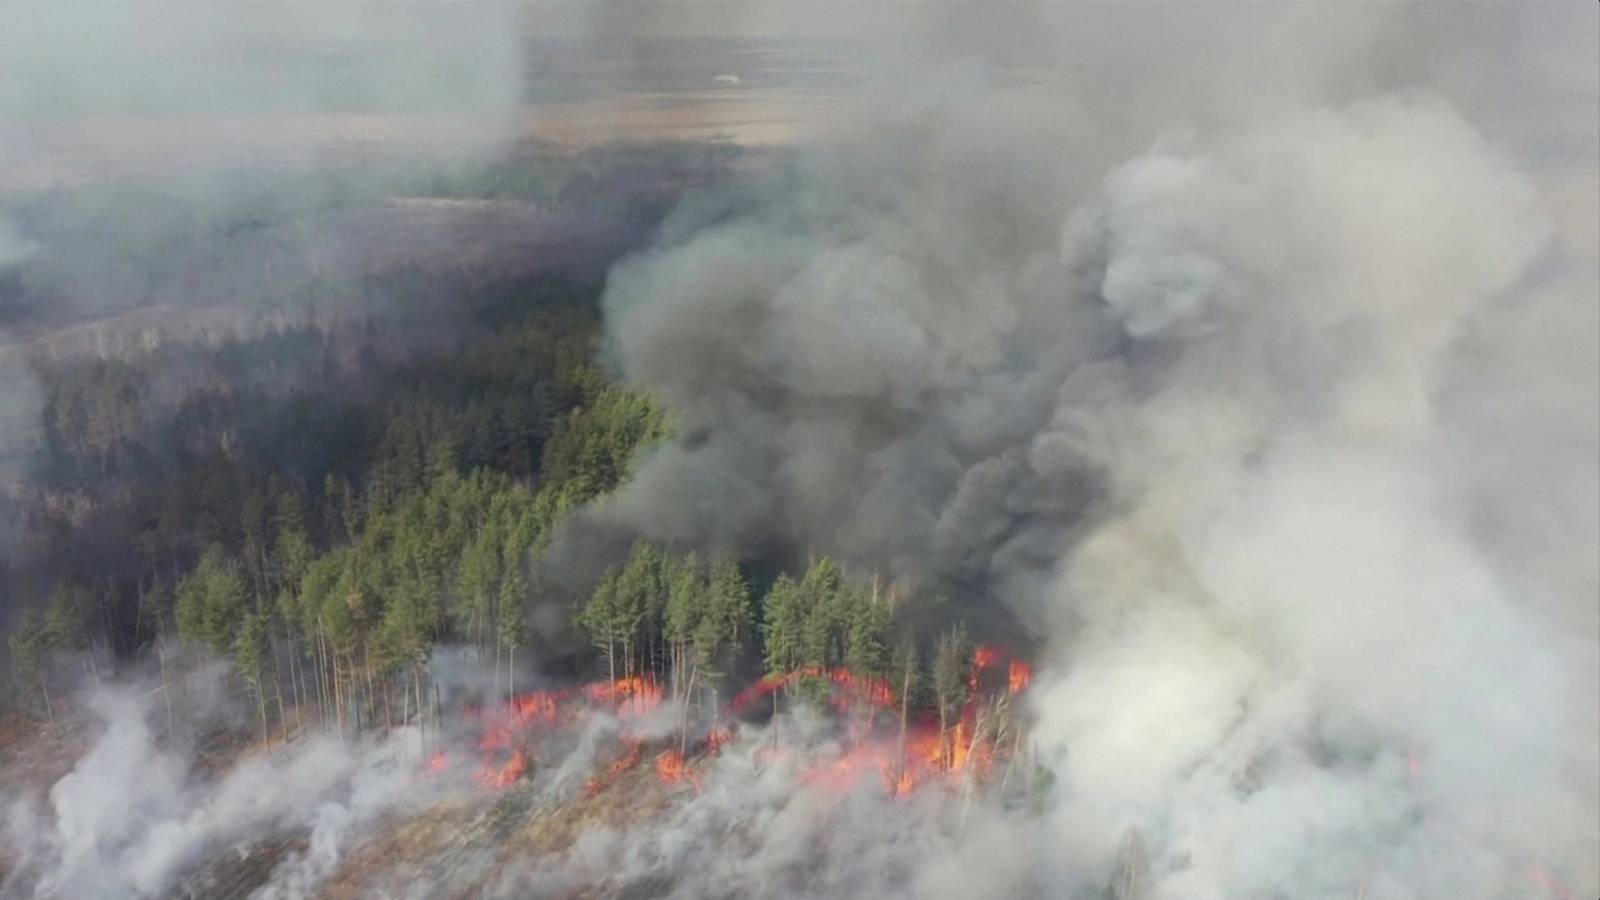 An aerial view shows a forest fire in the exclusion zone around the Chernobyl nuclear power plant